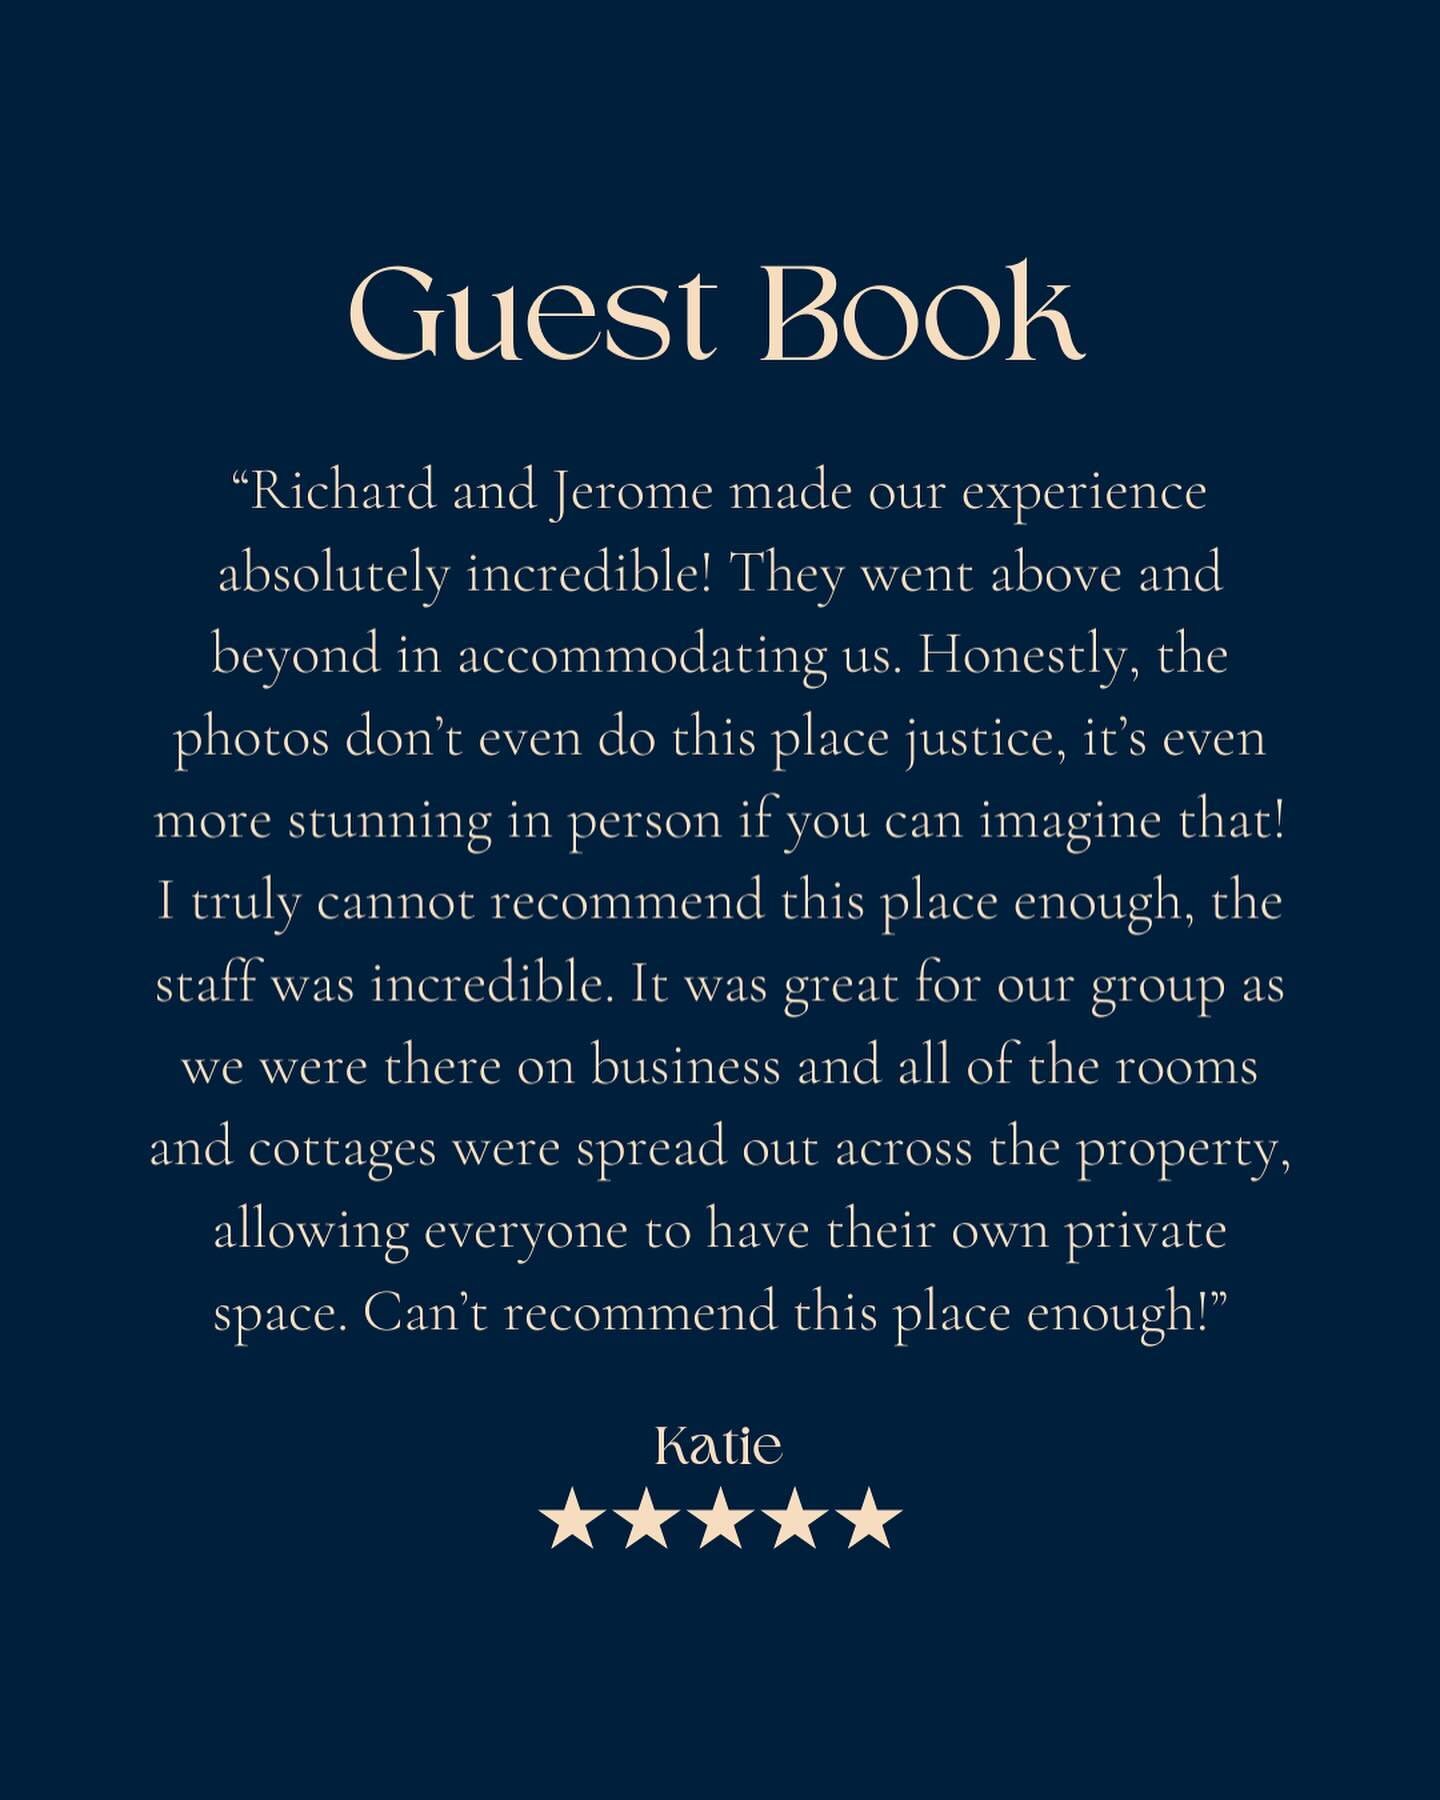 &ldquo;Richard and Jerome made our experience absolutely incredible! They went above and beyond in accommodating us. Honestly, the photos don&rsquo;t even do this place justice, it&rsquo;s even more stunning in person if you can imagine that! I truly